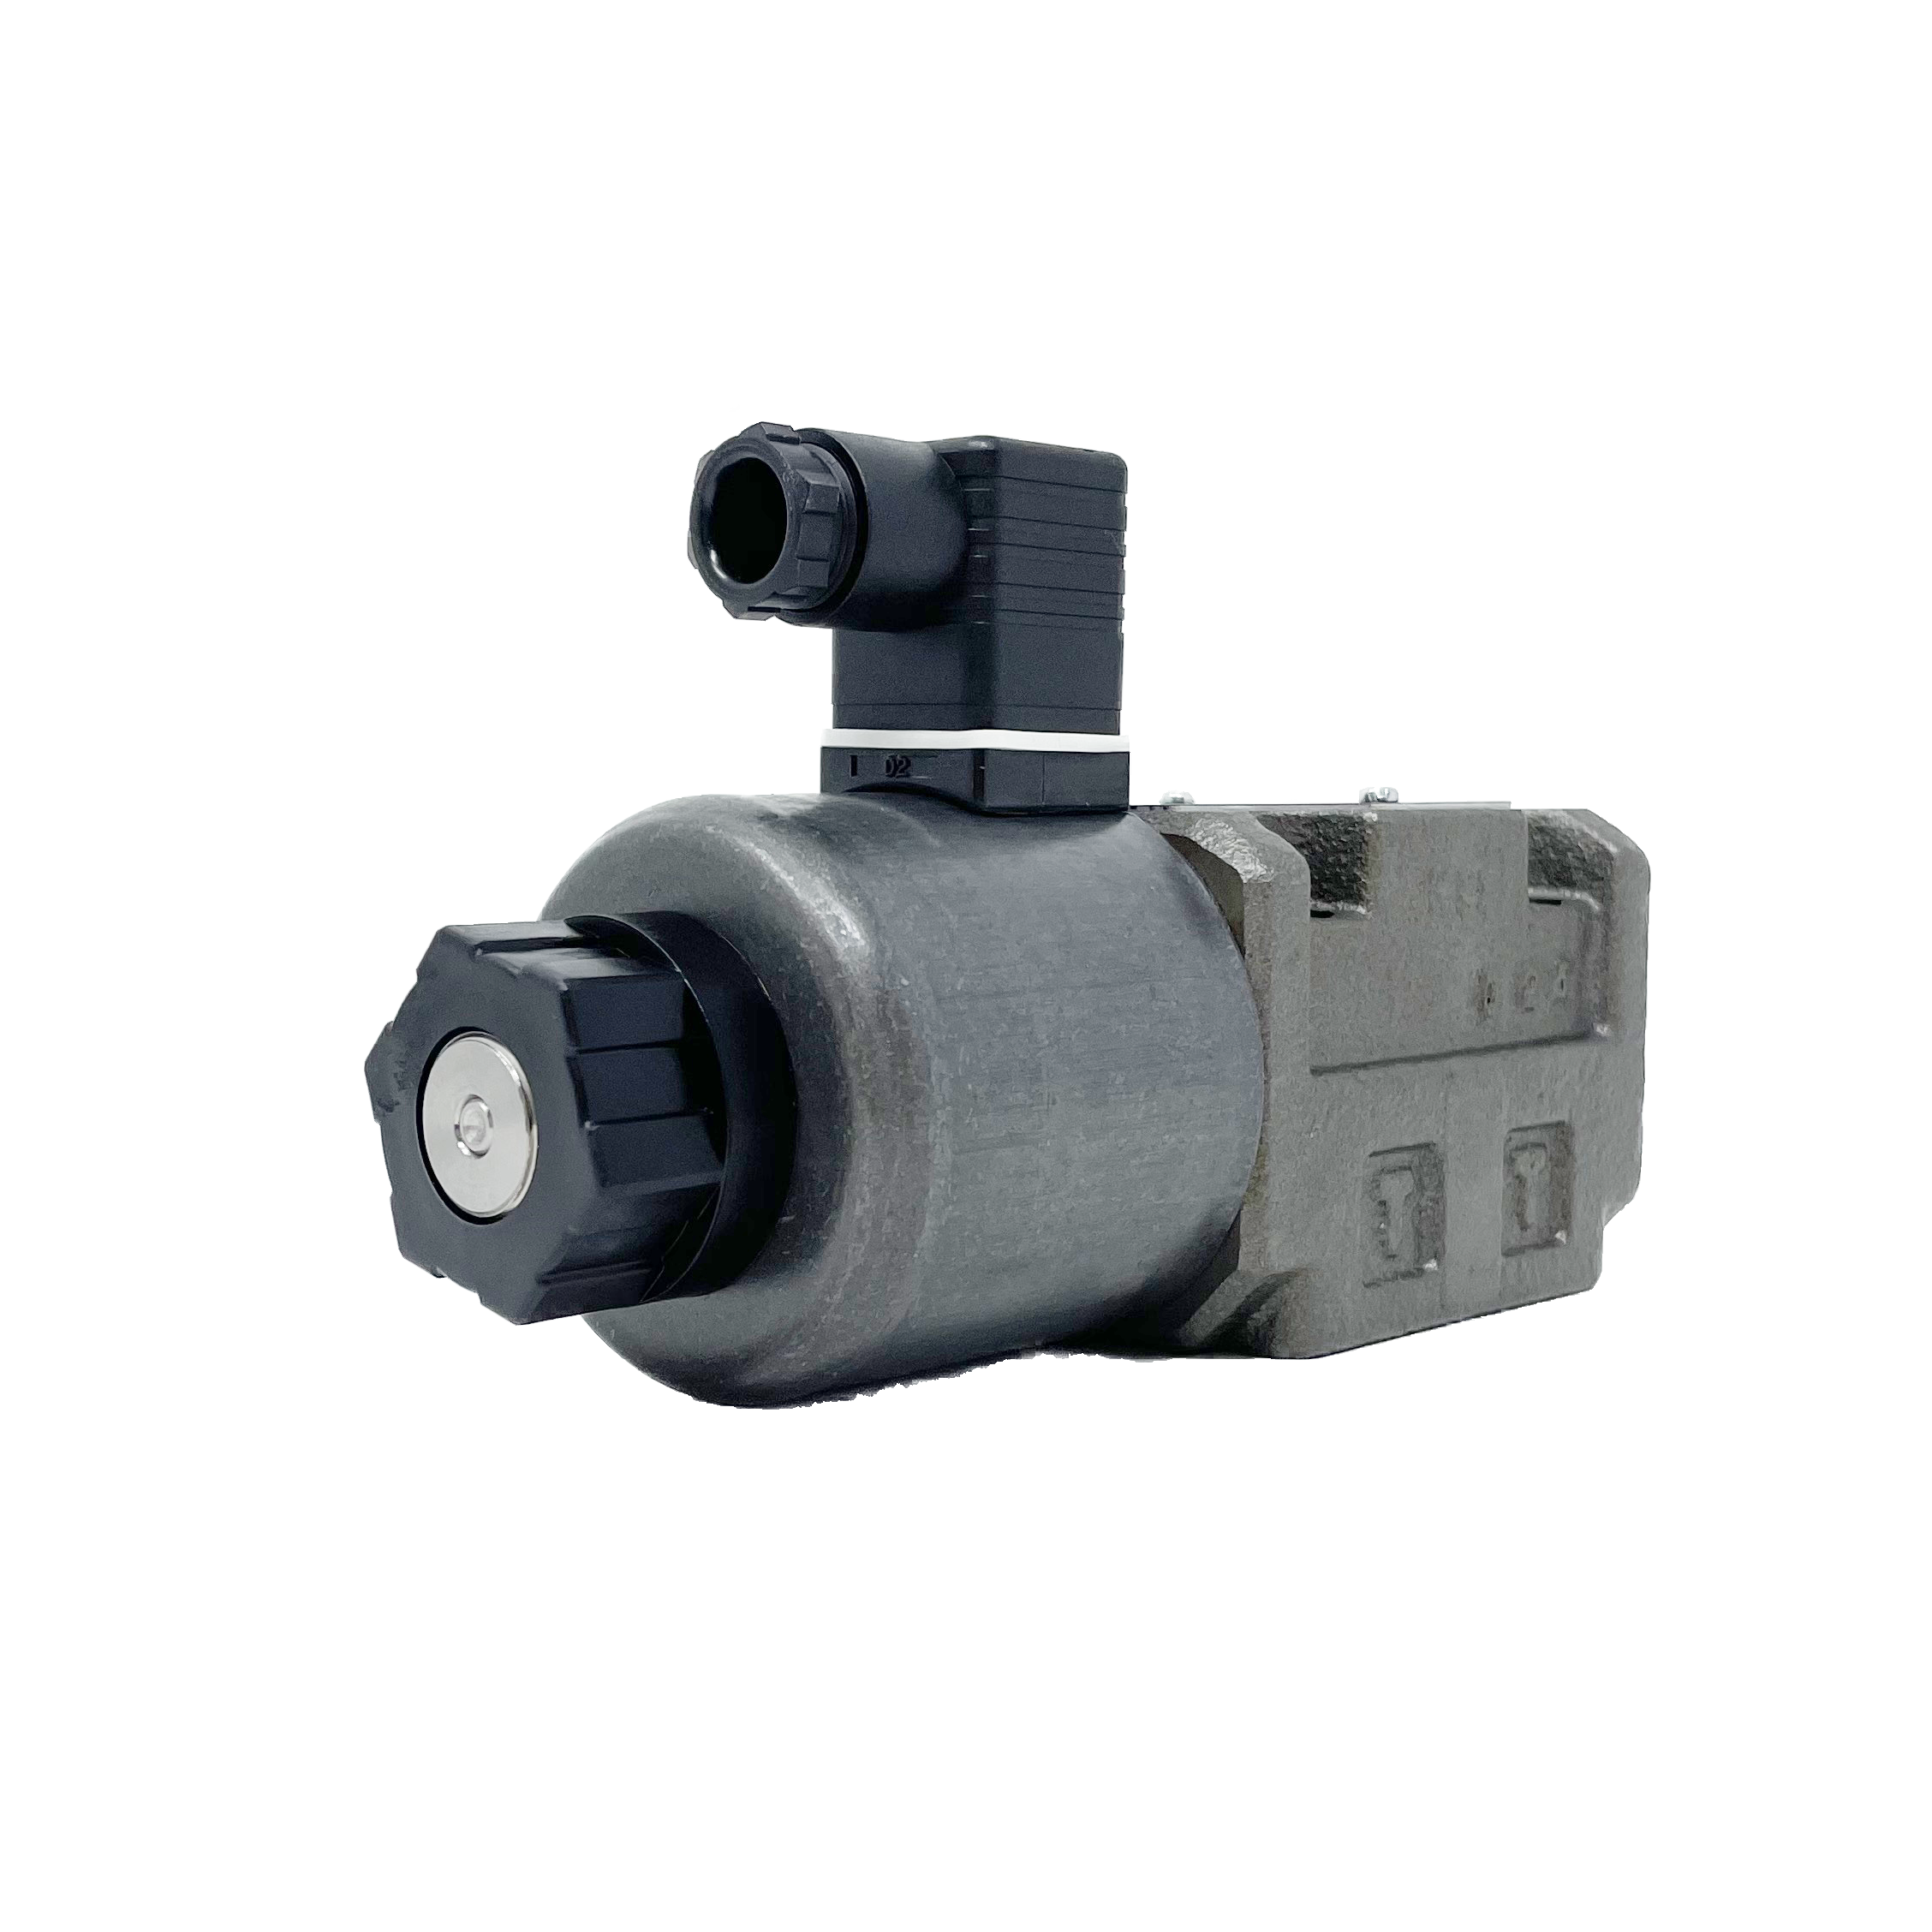 SA-G03-A4-D1-E21 : Nachi Solenoid Valve, 3P4W, D05 (NG10), 34.3GPM, 5075psi, All Ports Open Neutral, 12 VDC, DIN